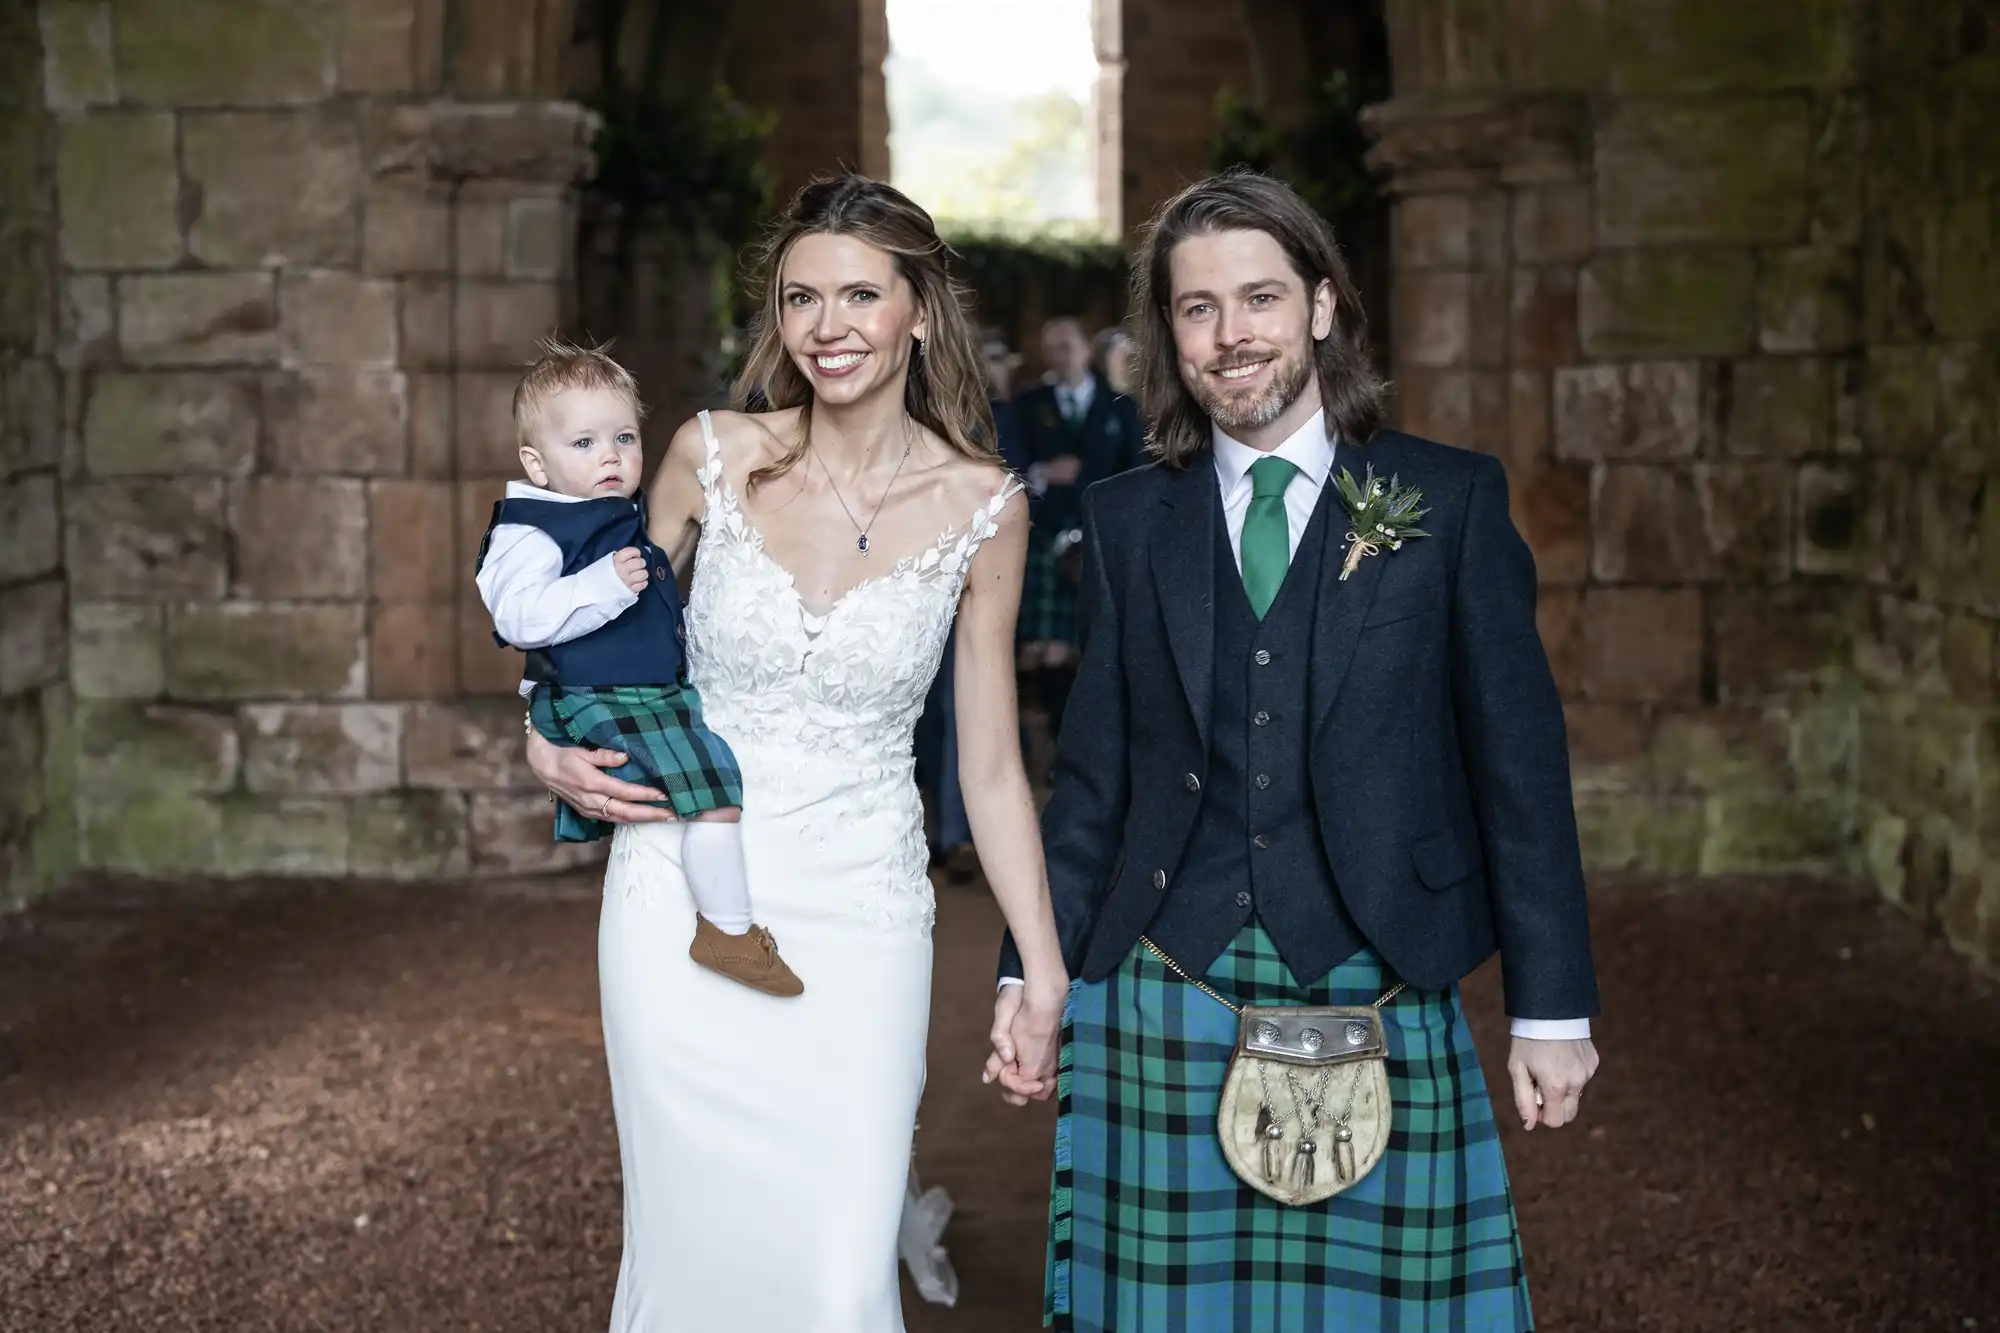 A couple dressed in wedding attire, with the man and child wearing traditional Scottish kilts, stand together holding hands in front of a rustic stone structure. The woman holds the child in her left arm.